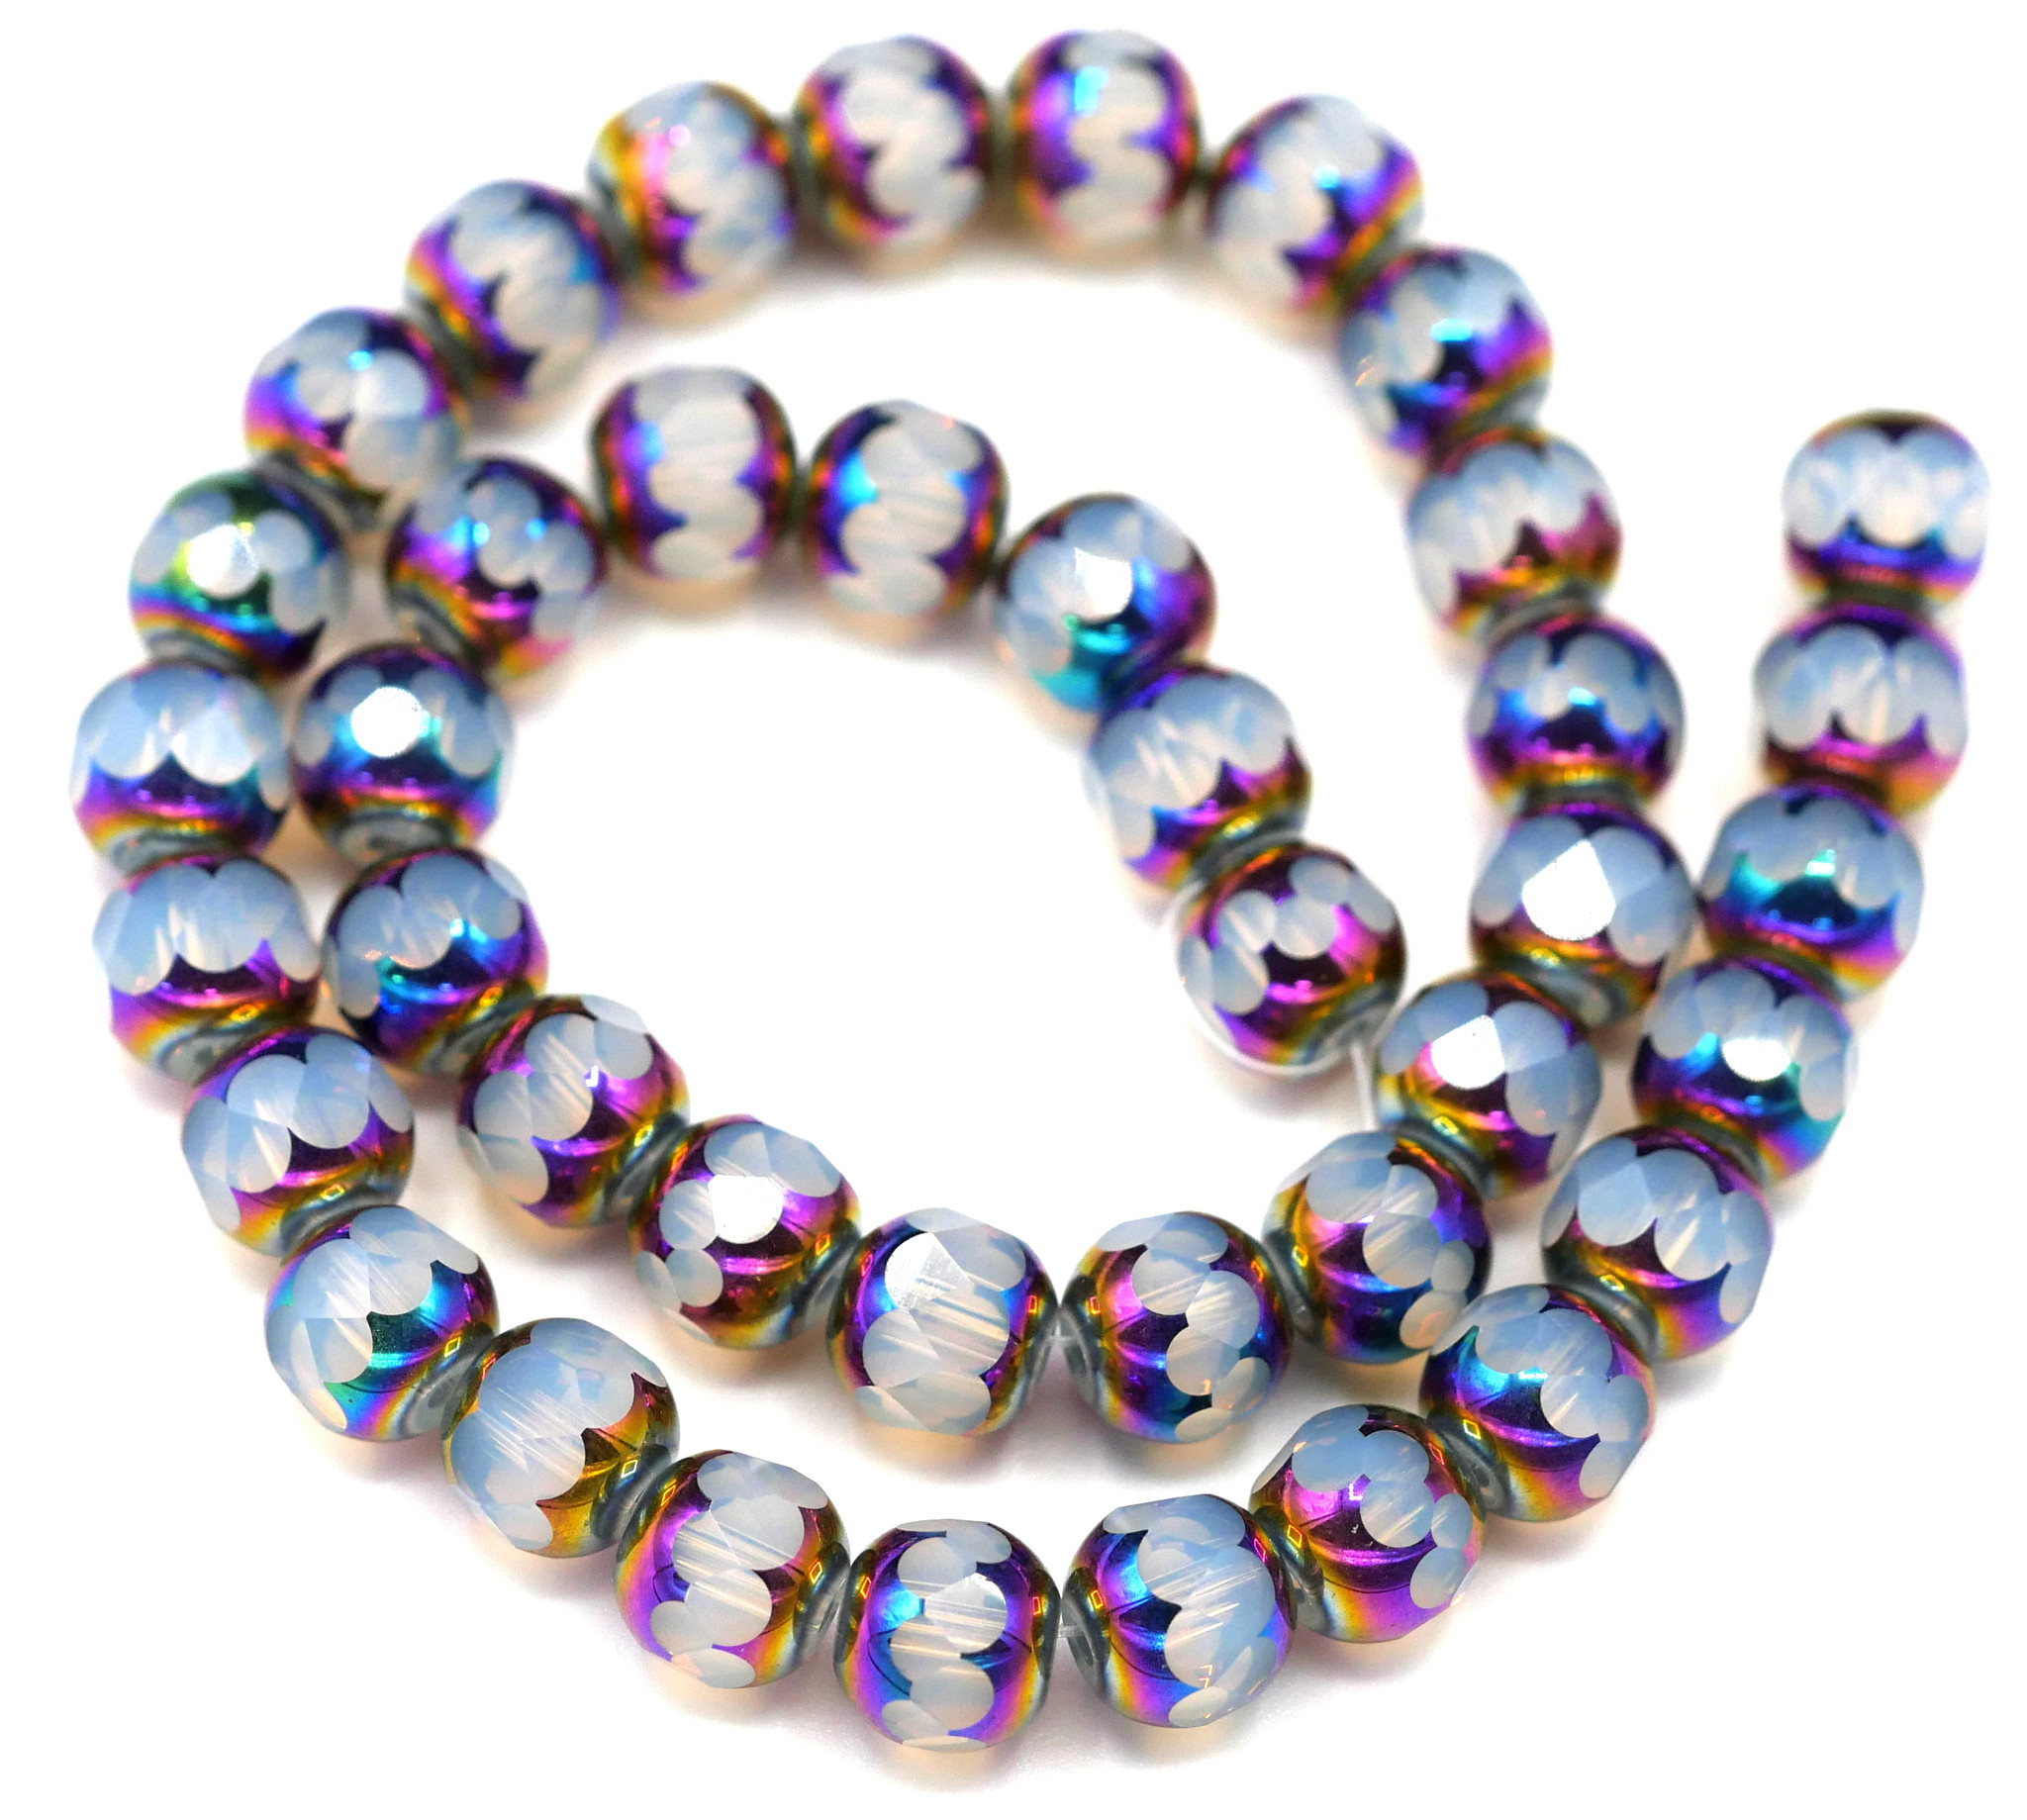 Approx. 12 Strand 8mm Glass Faceted Window Beads, White Opal/Rainbow Iris